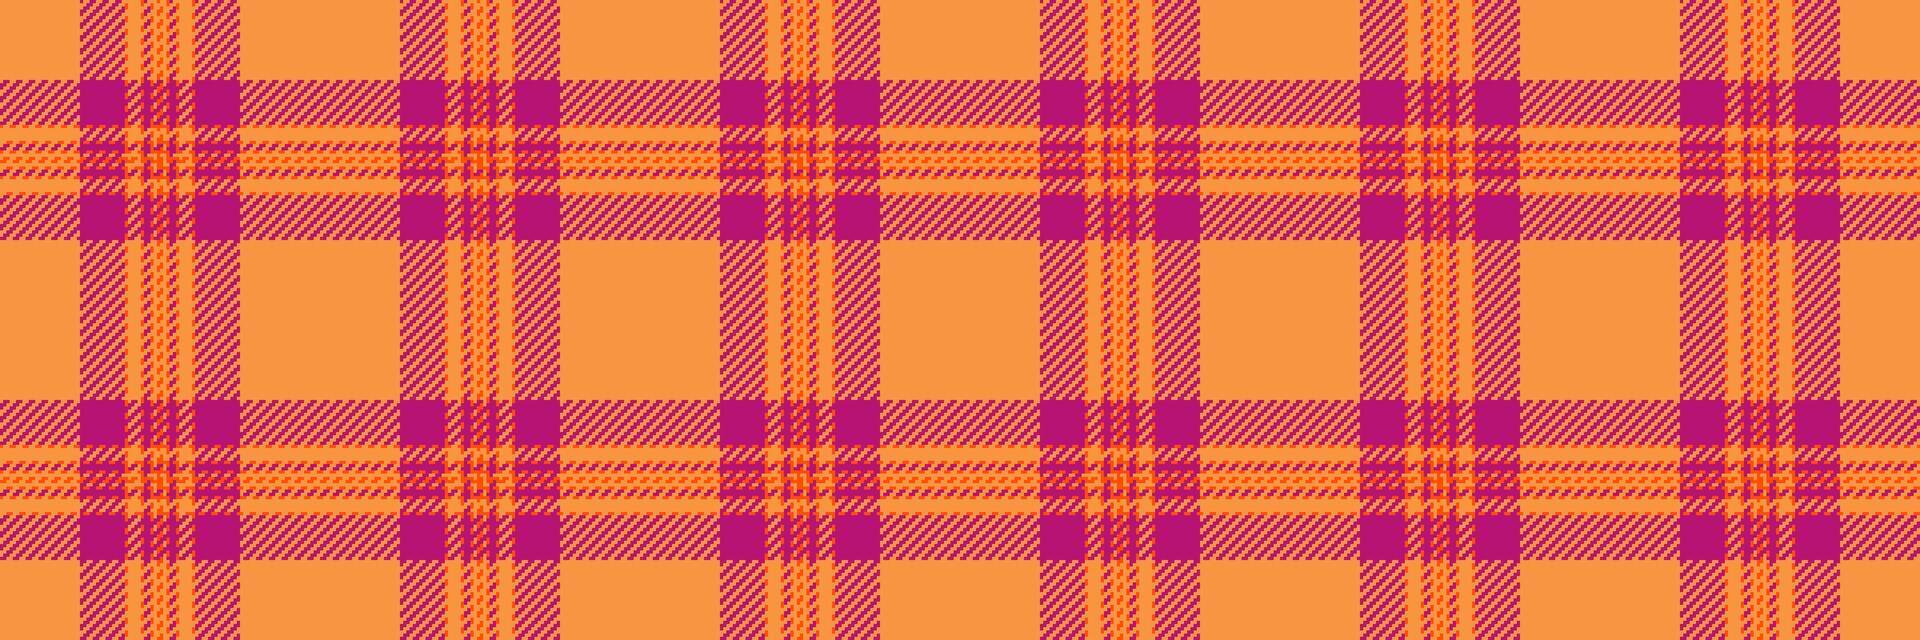 Structure texture check, stage textile pattern plaid. Geometry background seamless tartan fabric in orange and pink colors. vector